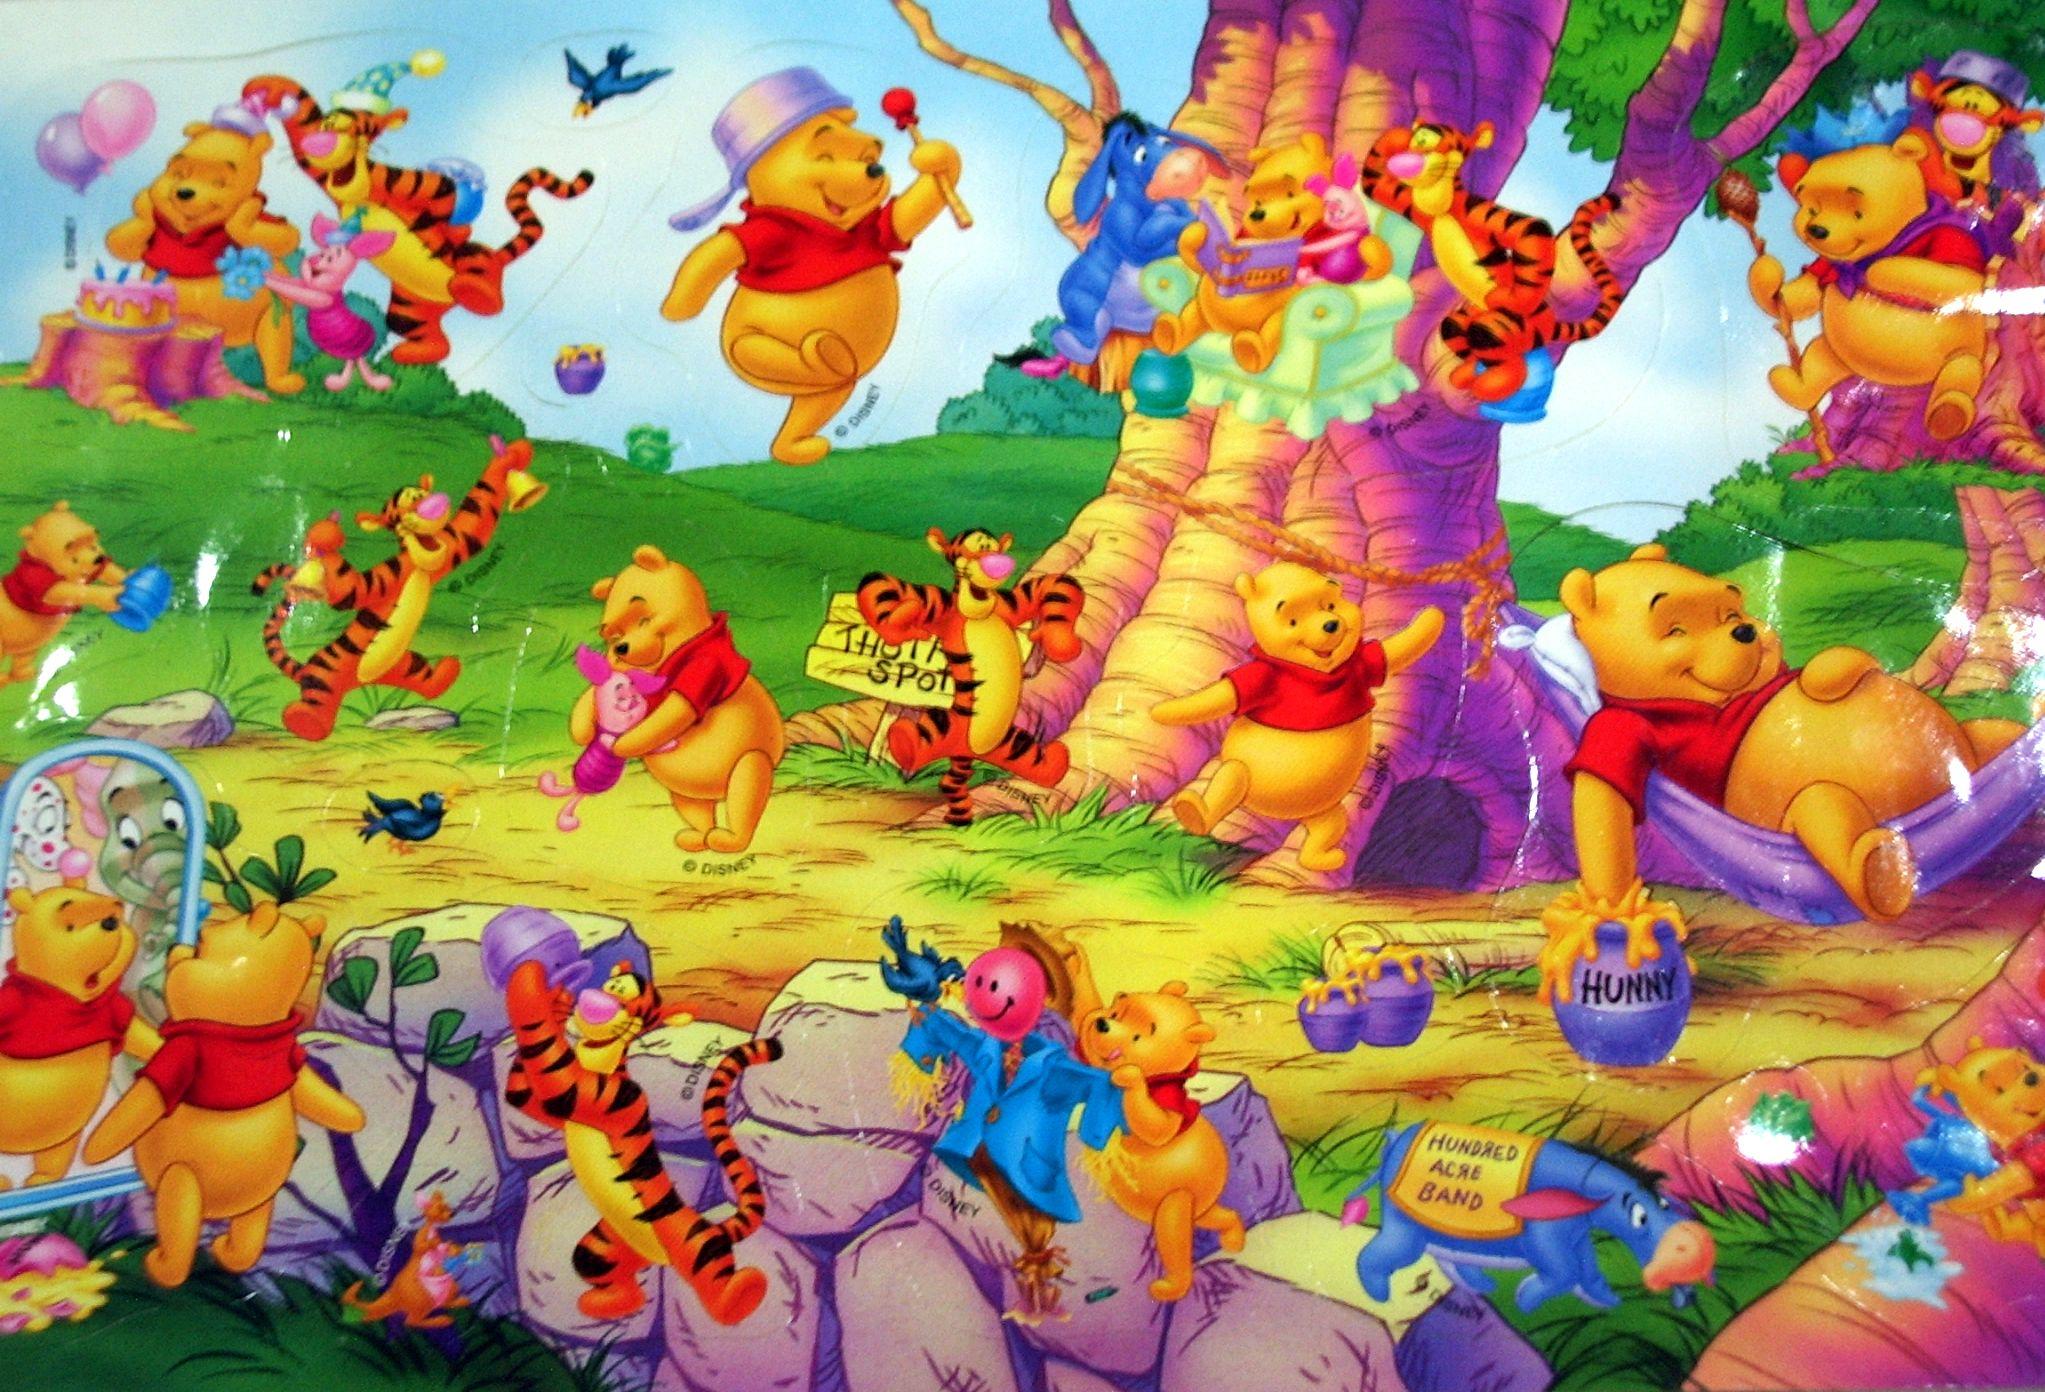 Winnie The Pooh HD Wallpaper and Background Image